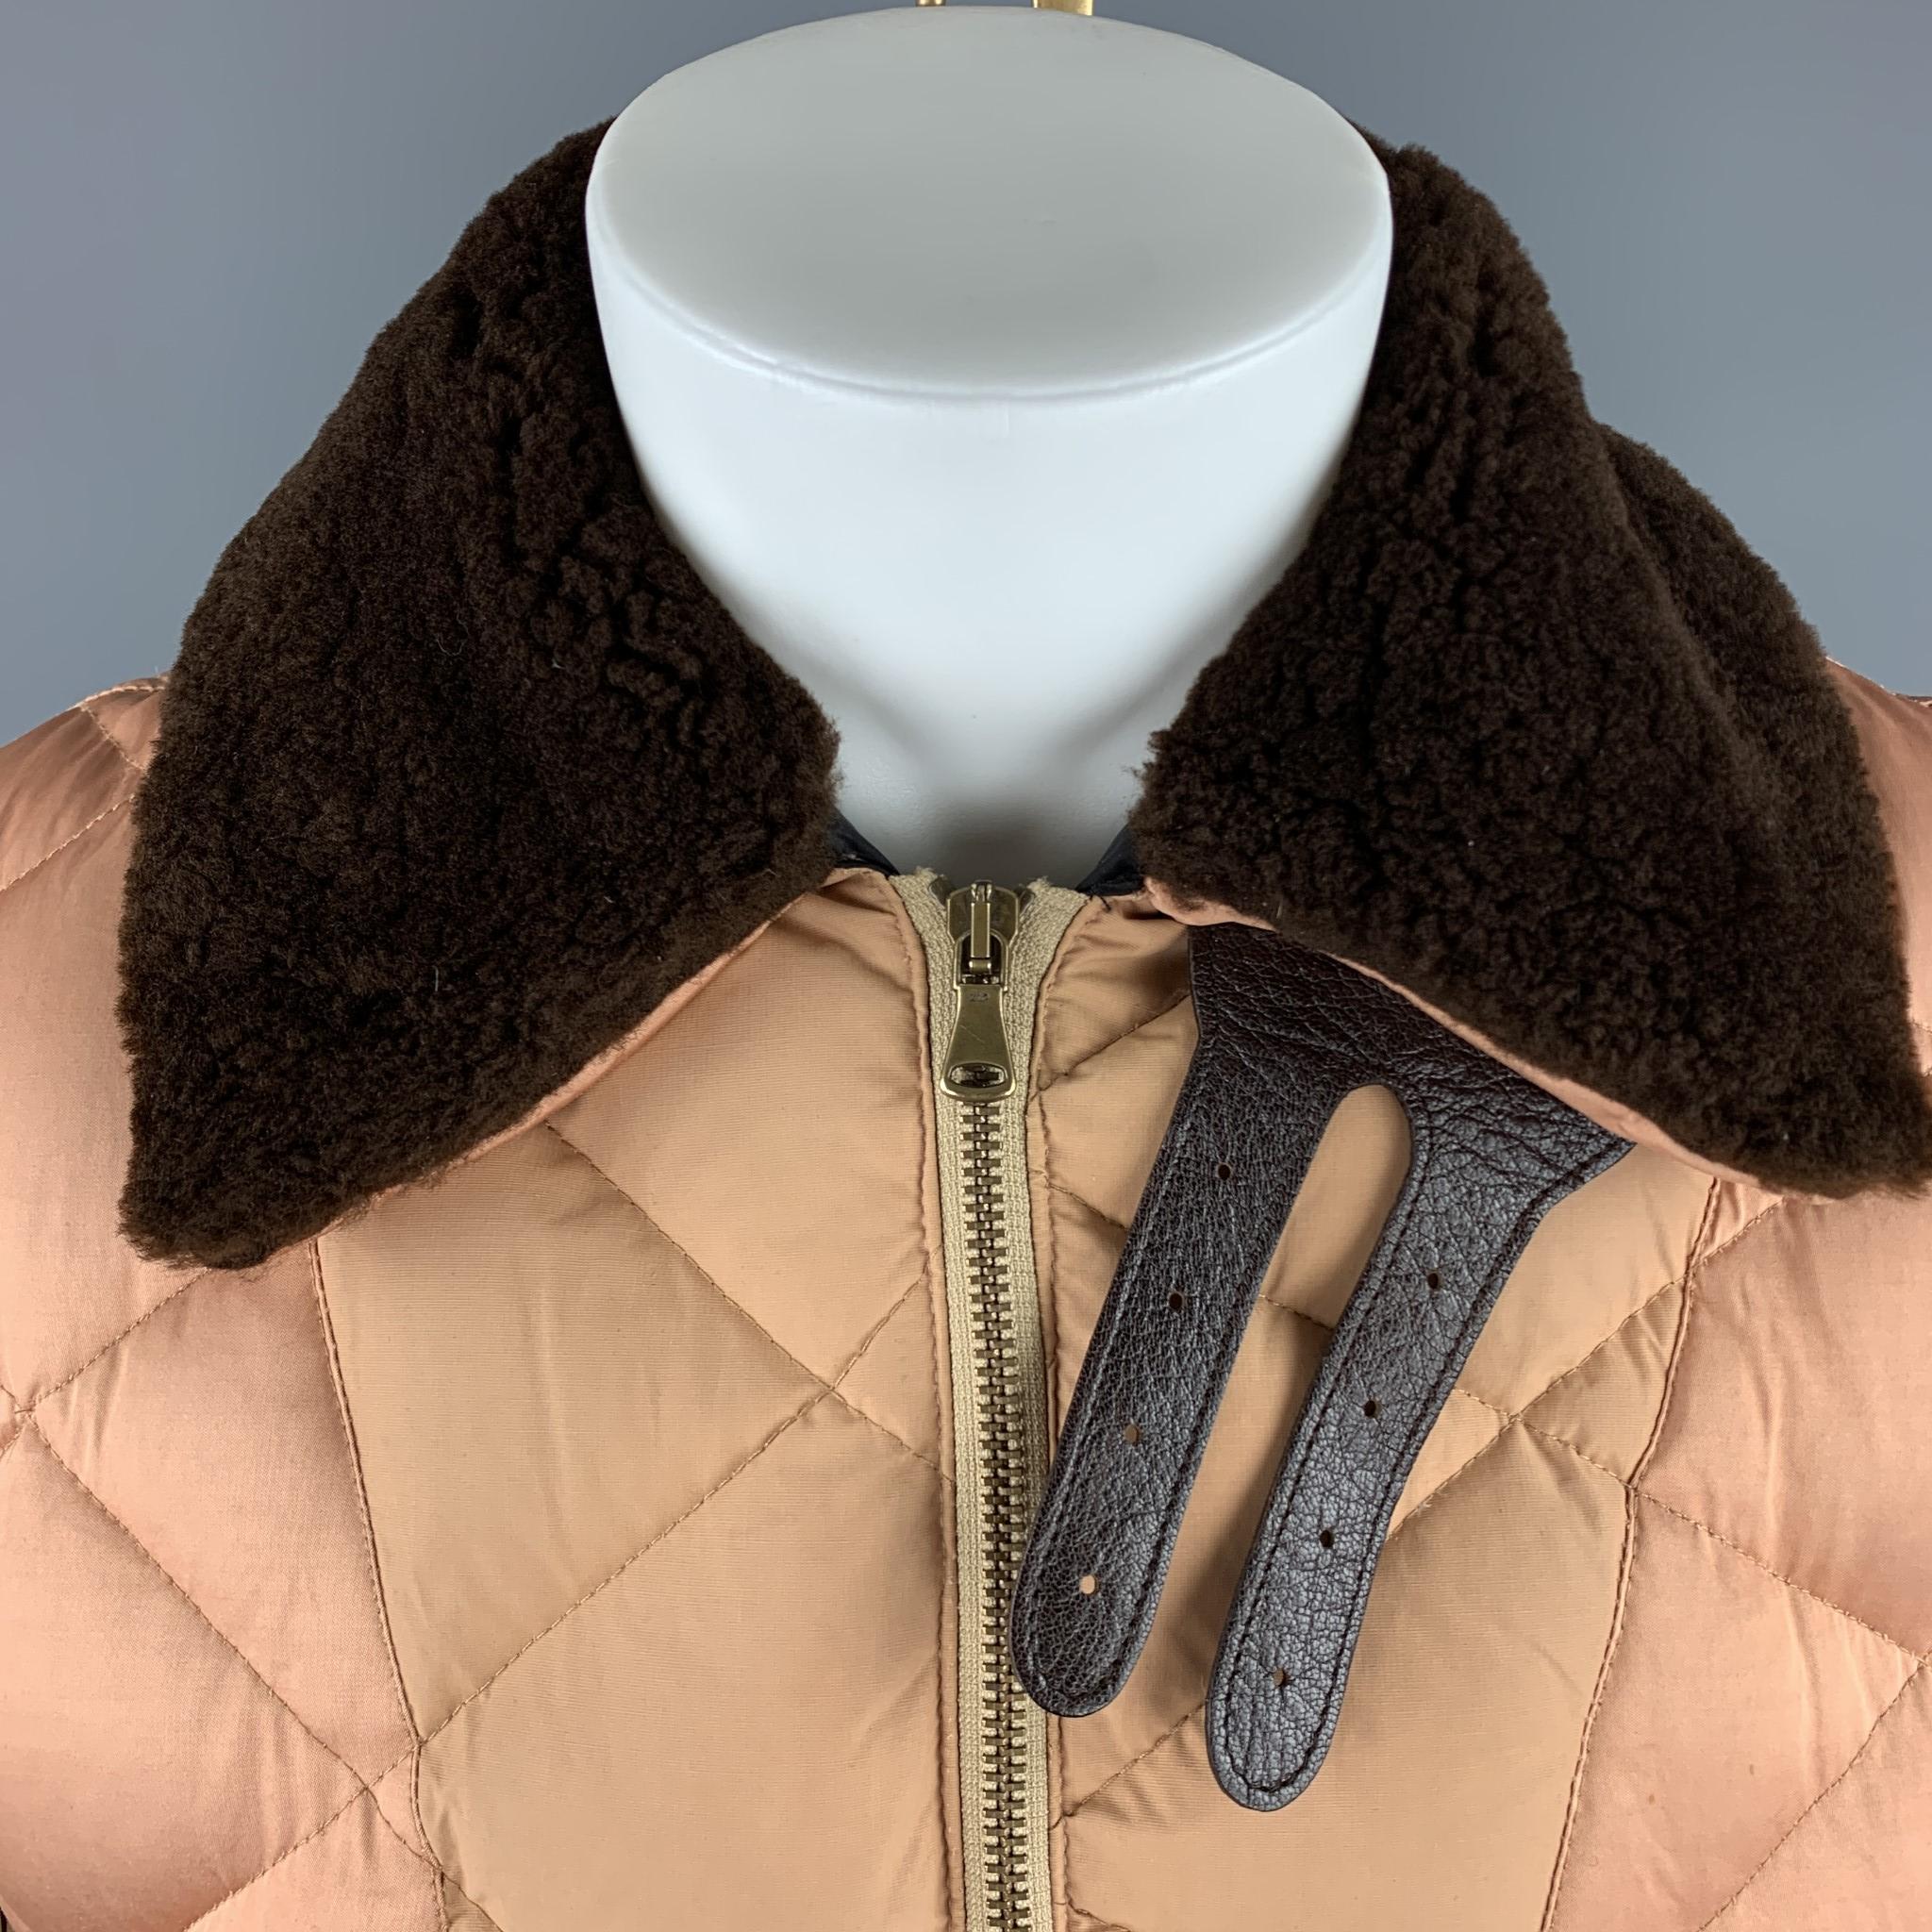 Vintage JEAN PAUL GAULTIER quilted puffer jacket comes in khaki cotton with a beige sateen shoulder panel, striped zip sleeves, double zip vent back with snap flaps, and brown faux fur collar. Made in Italy.

Very Good Pre-Owned Condition.
Marked: